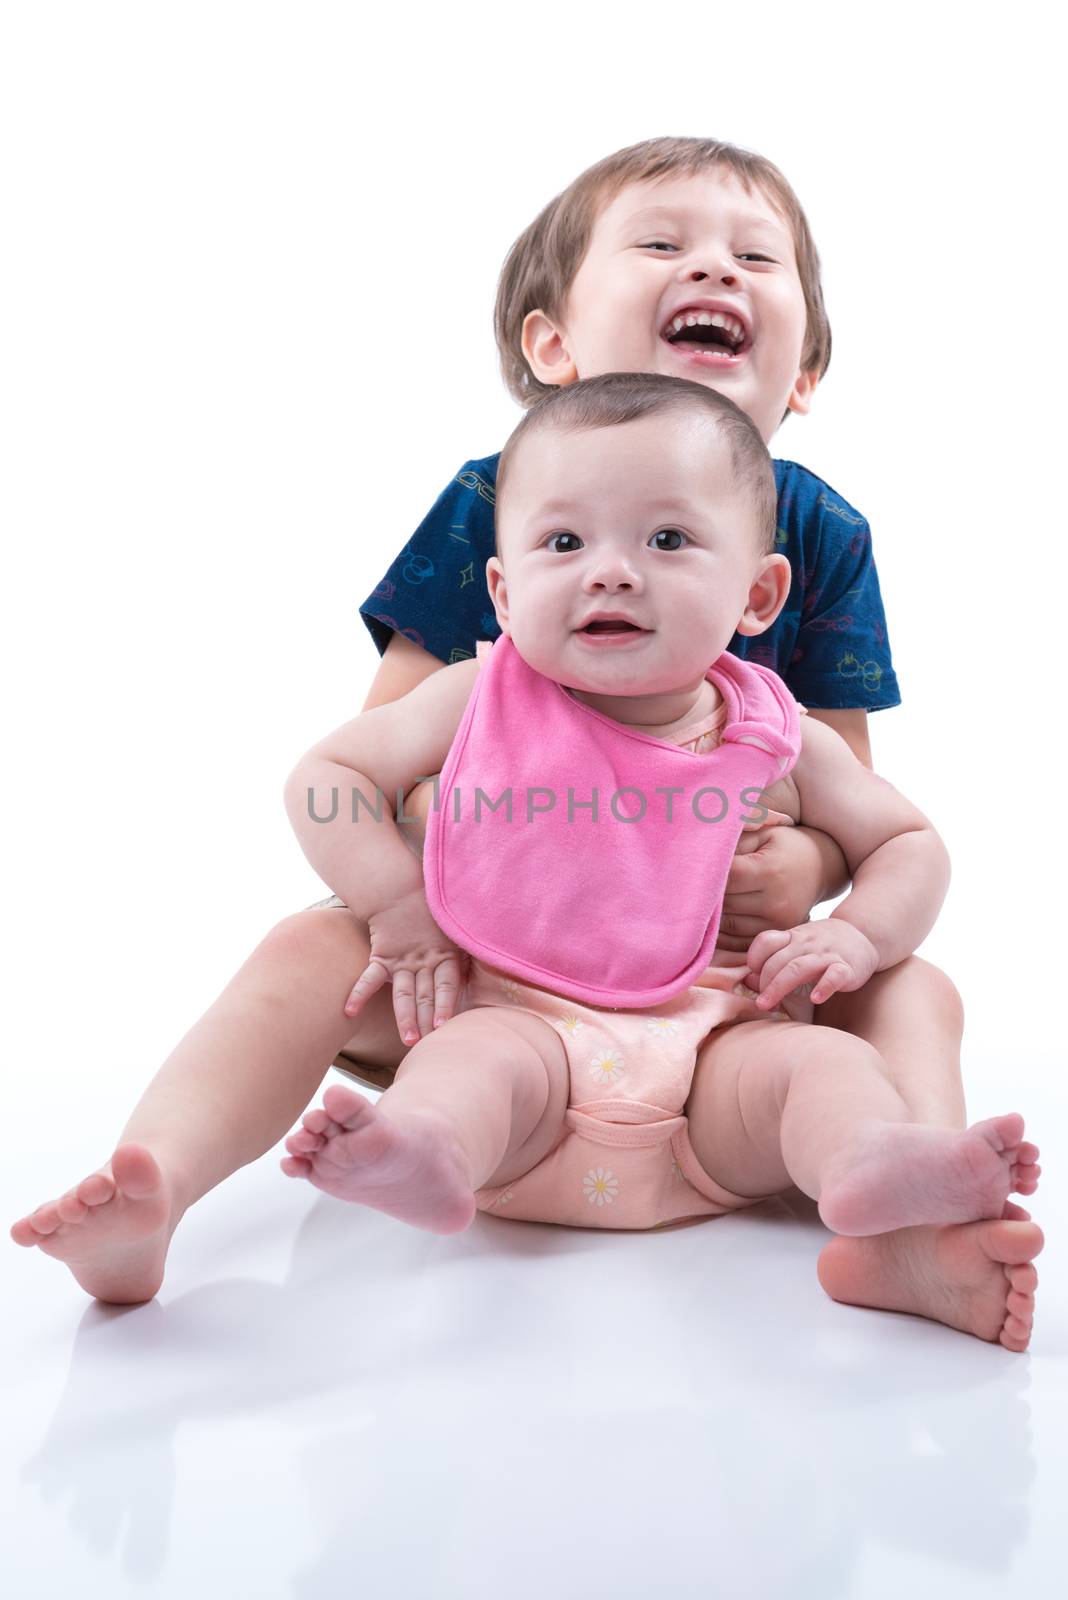 A happy young boy and his baby sister smiling and hugging on a white background.